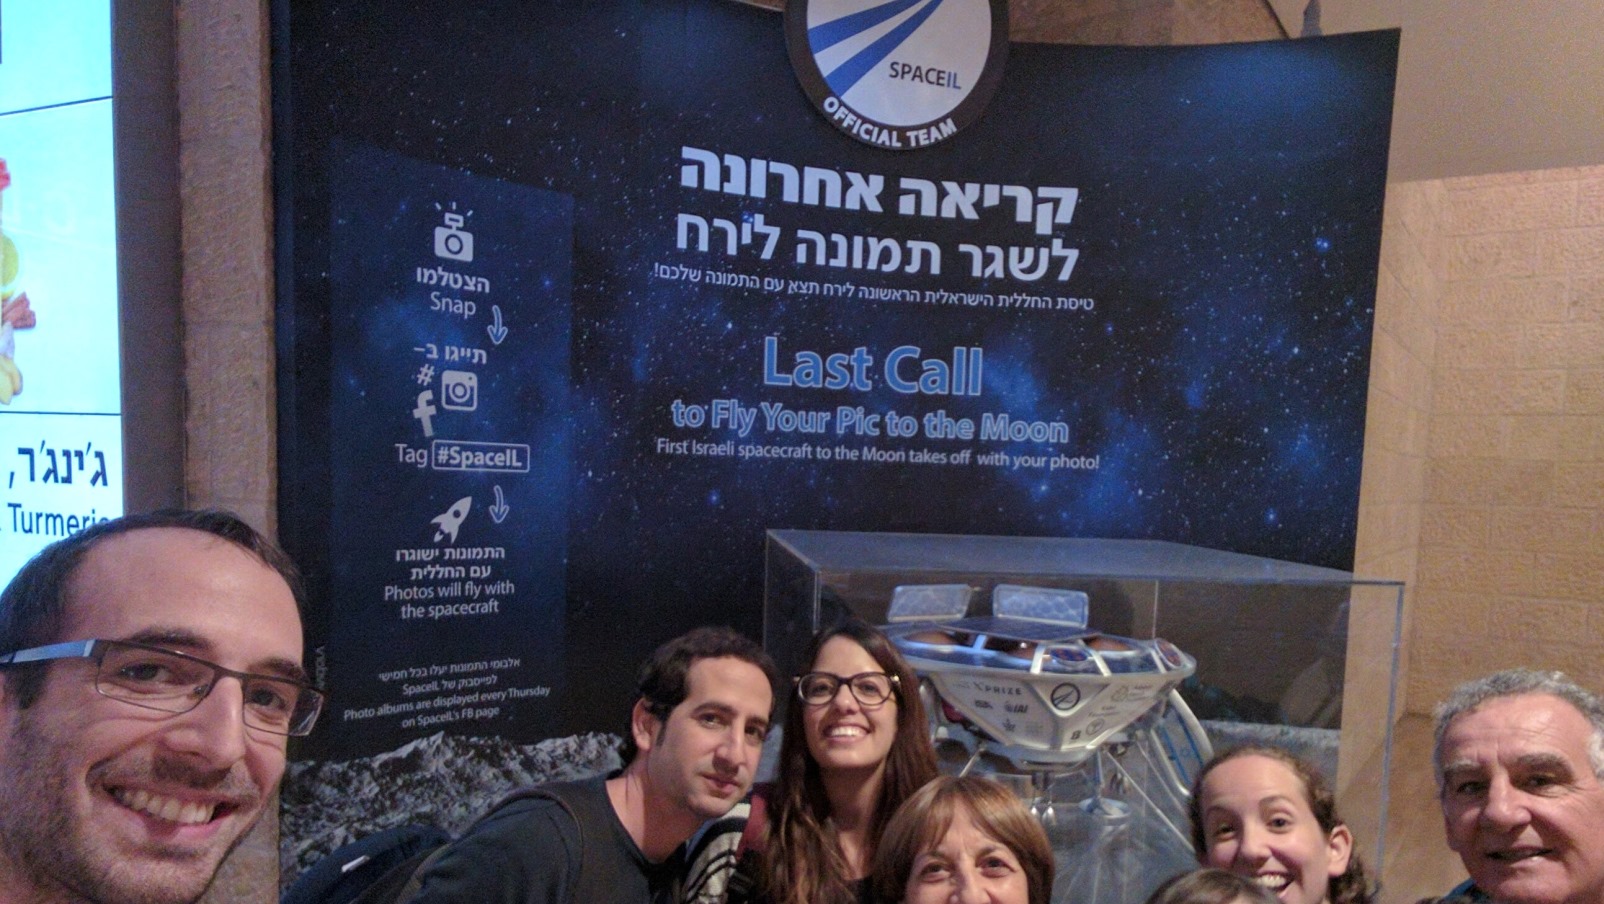 Israelis responded enthusiastically to calls for drawings and selfies with a model of the spacecraft to go into the time capsule being launched into outer space. Photo courtesy of SpaceIL